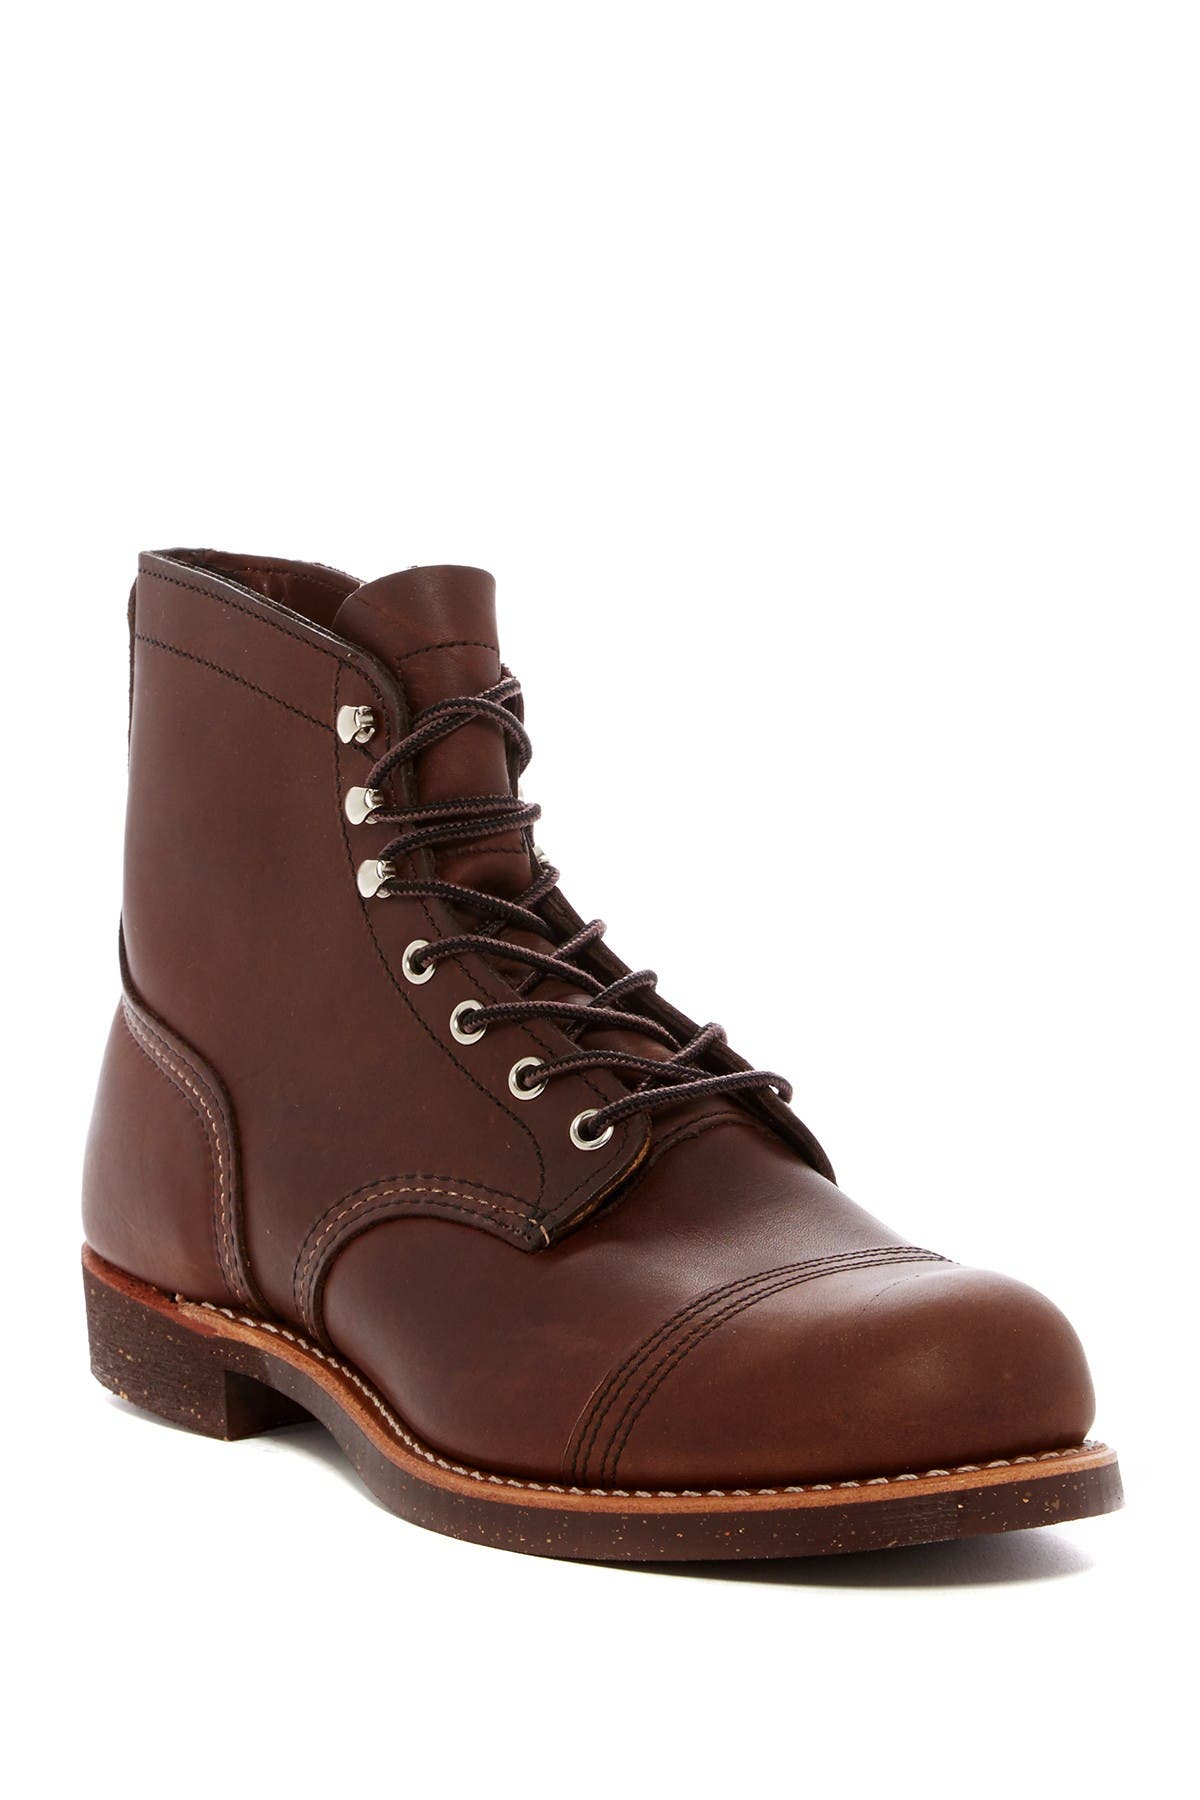 red wing shoes nordstrom rack